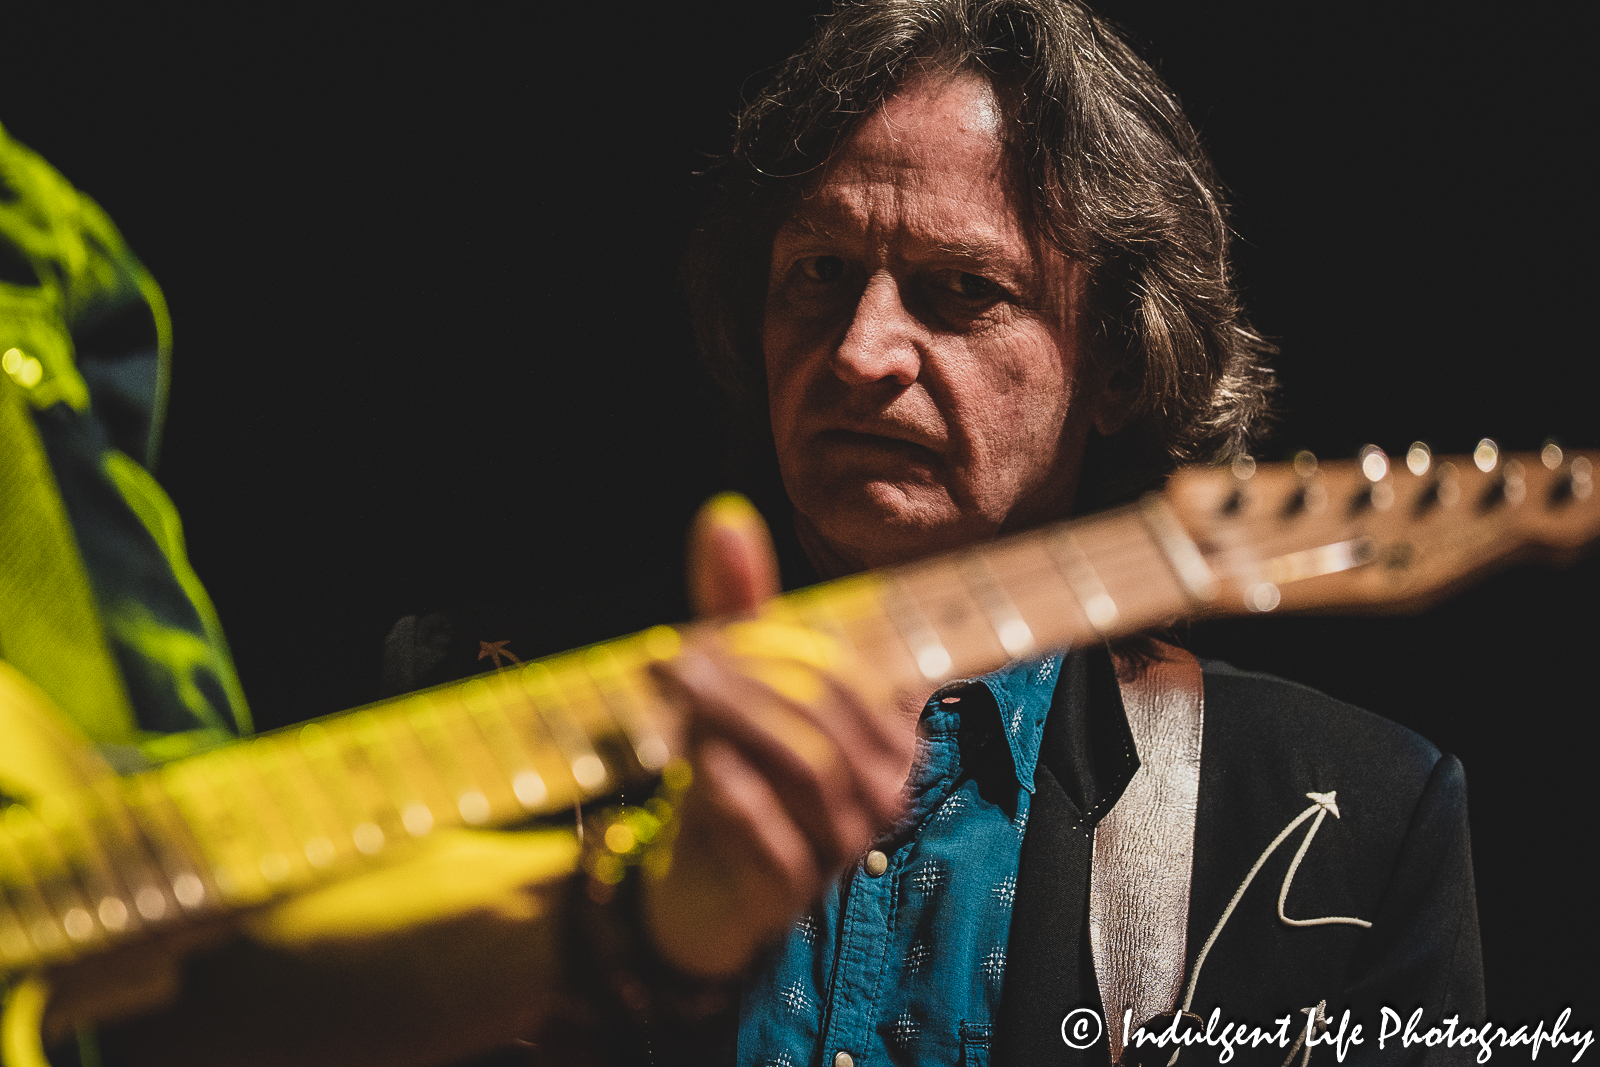 Nitty Gritty Dirt Band lead singer Jeff Hanna live in concert at Ameristar Casino's Star Pavilion in Kansas City, MO on July 8, 2023.